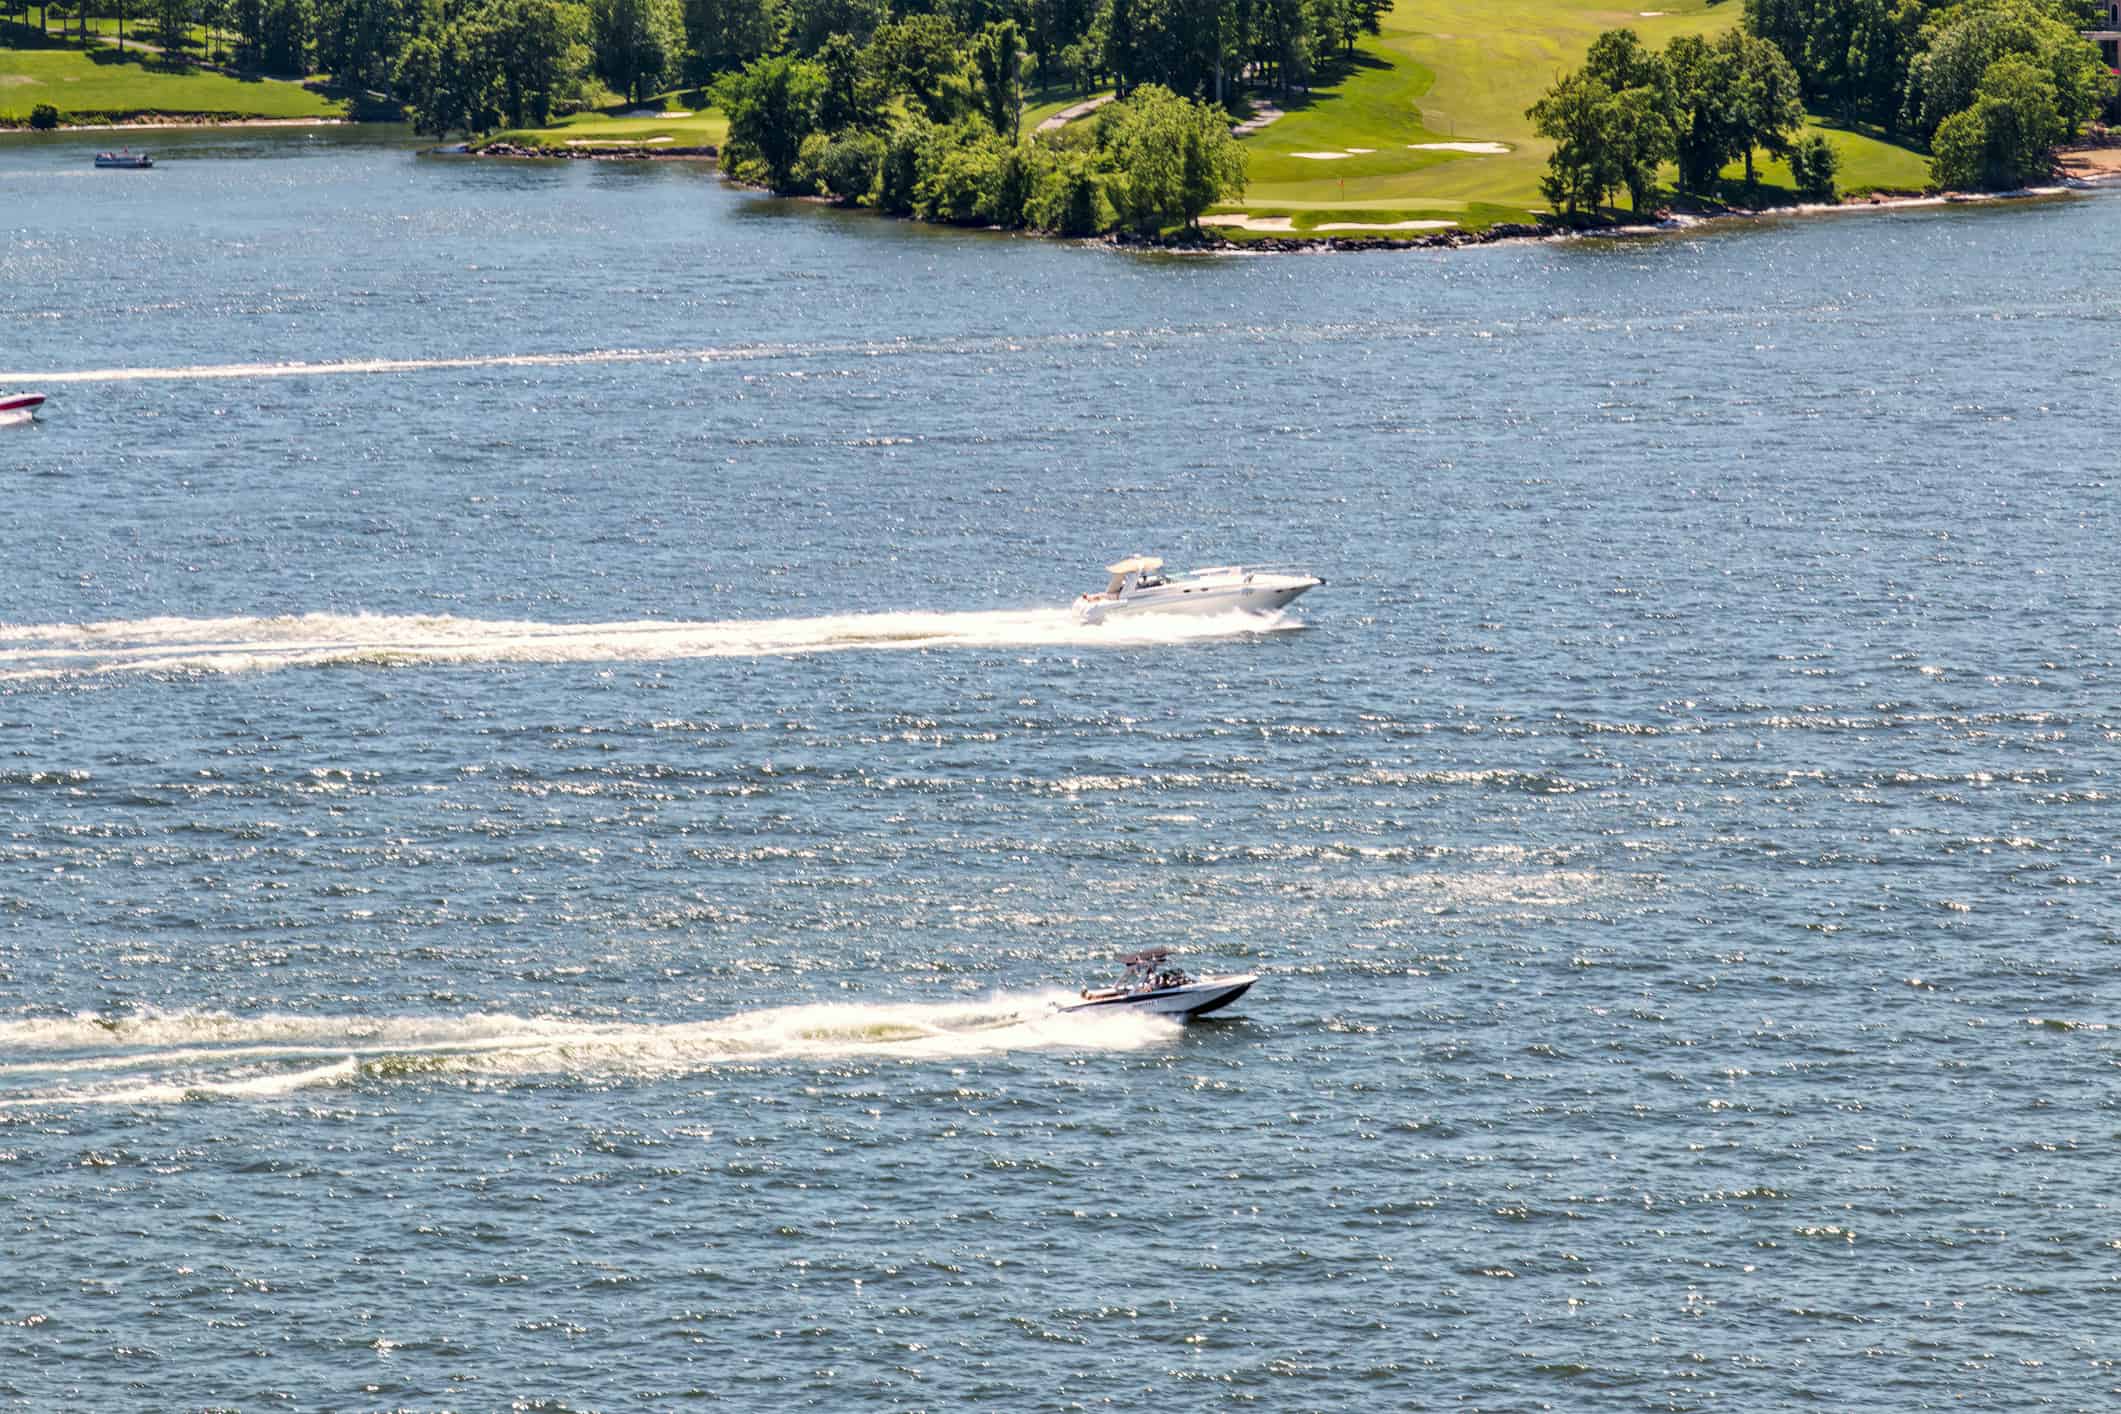 Speed boats in full throttle in Lake of Ozark and the golf course in the background, Missouri, USA.